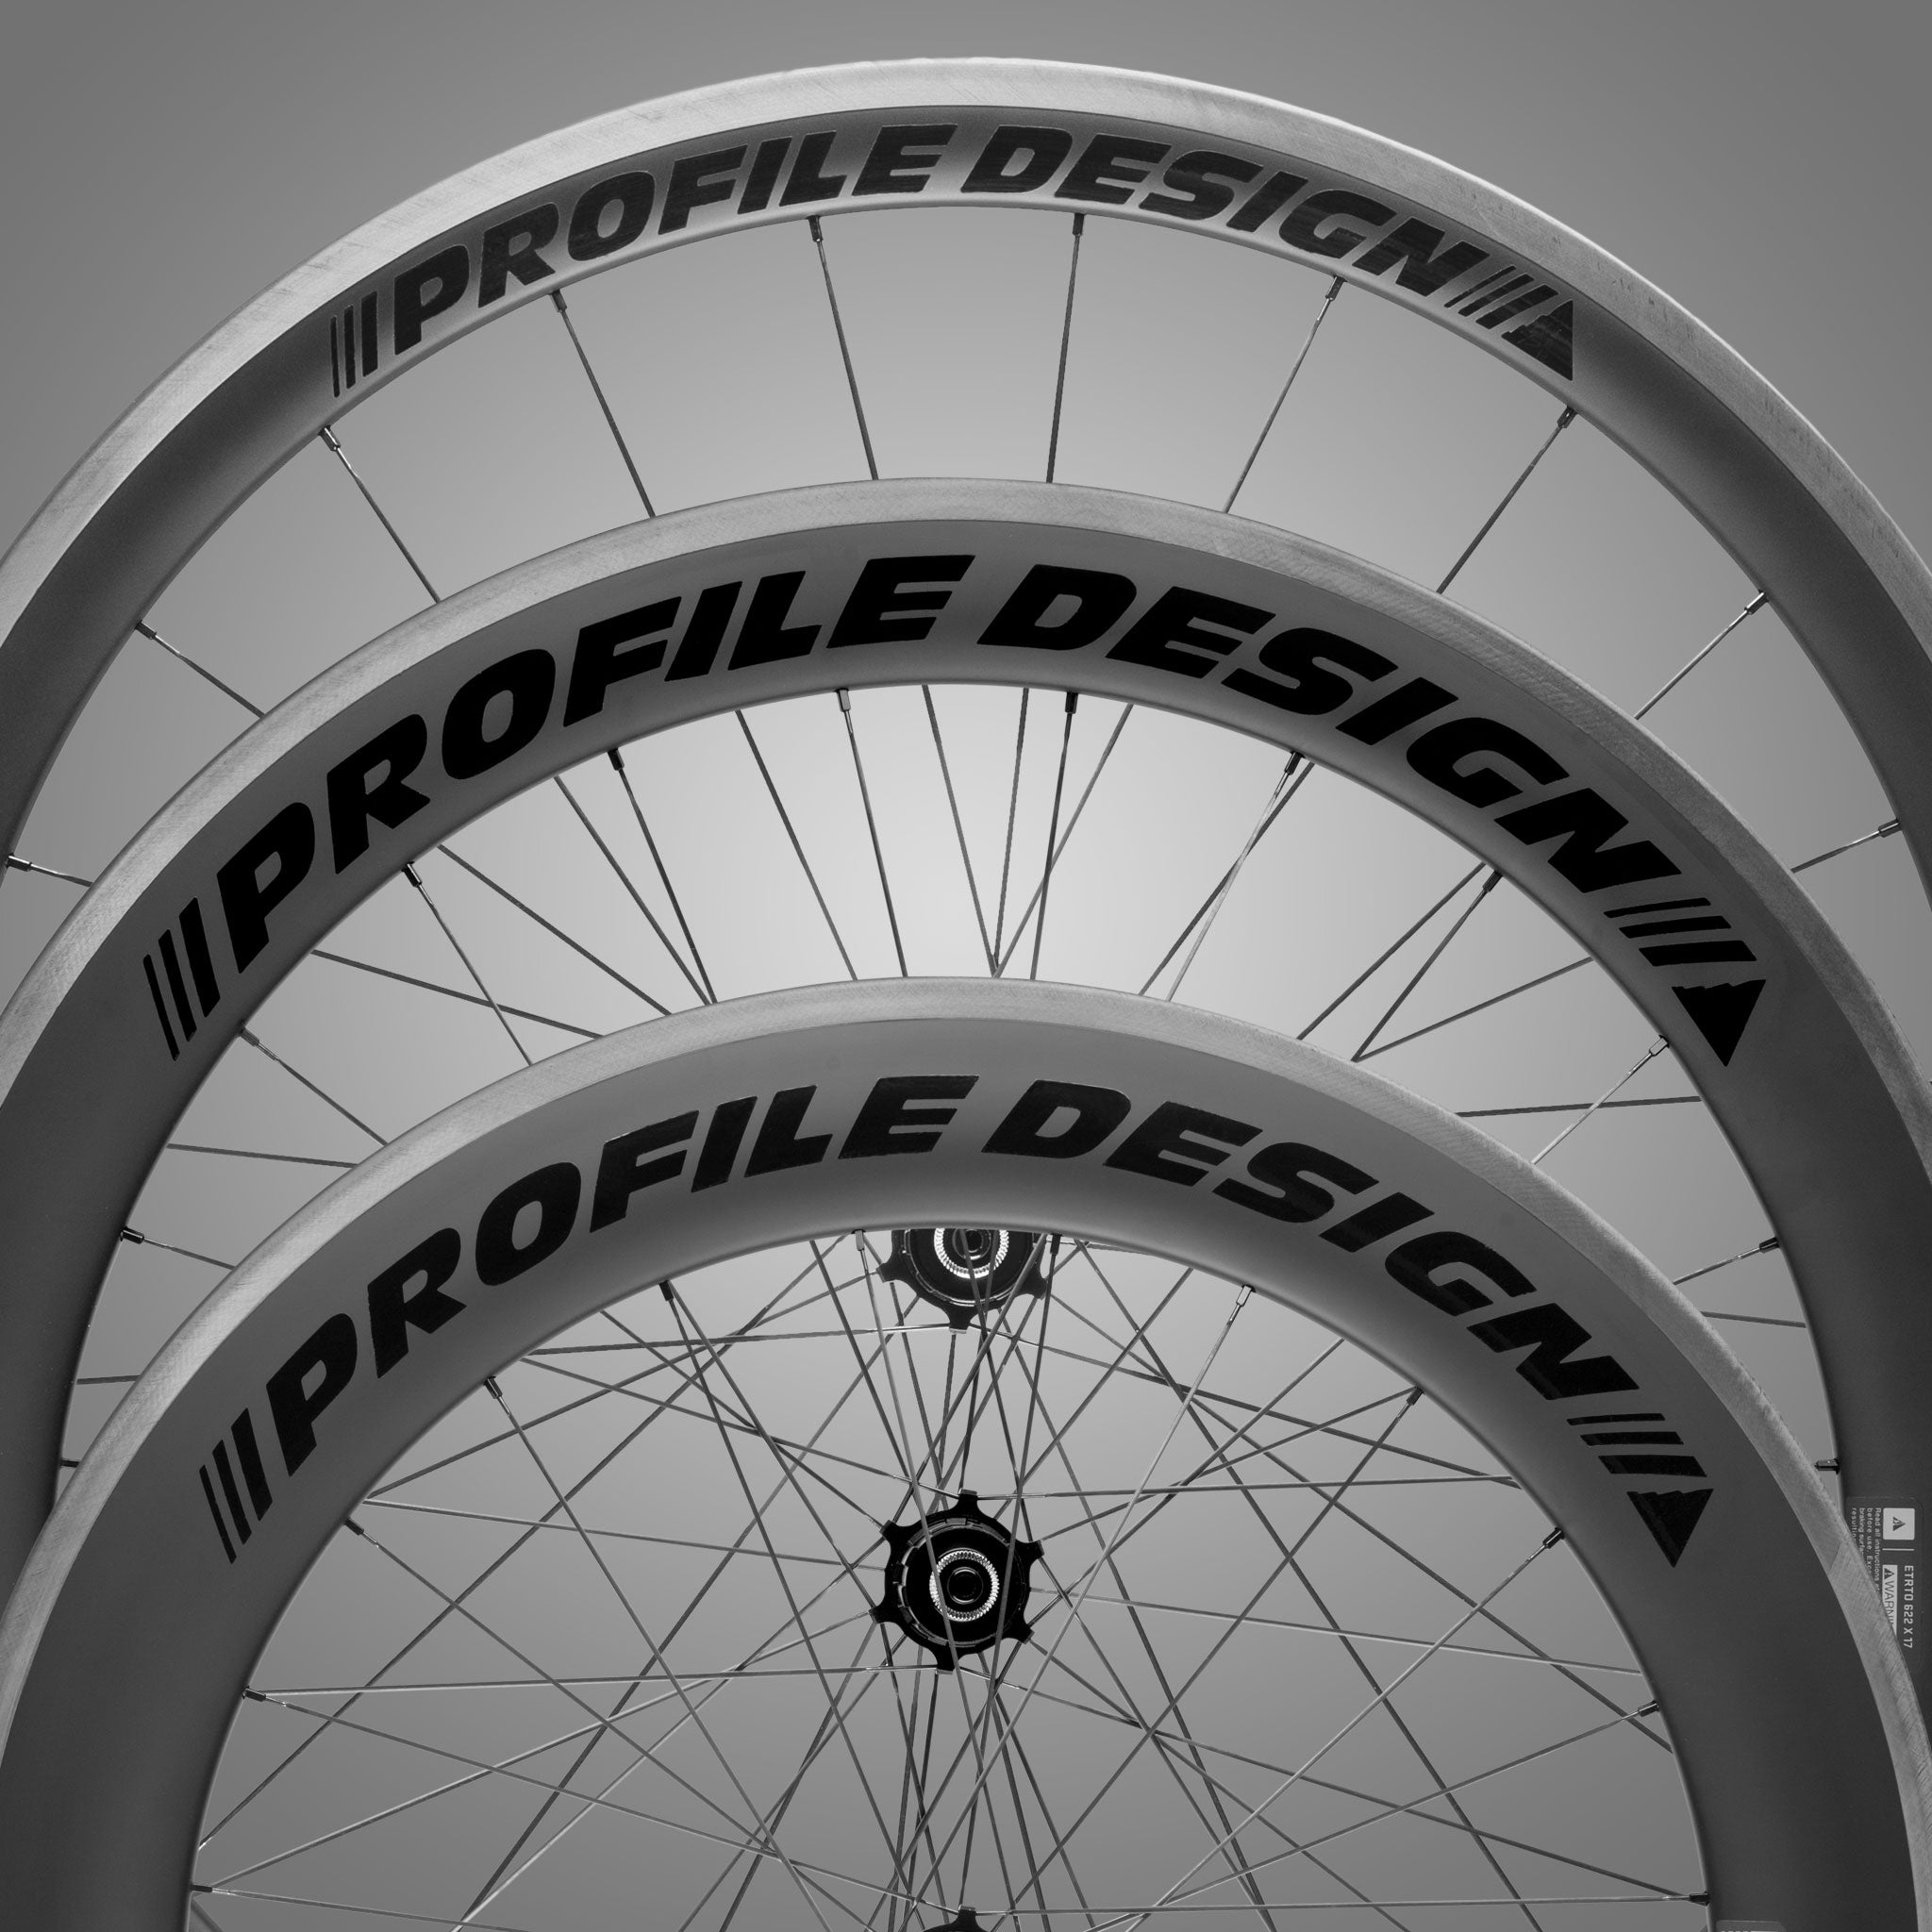 spiegel Pracht Melodrama Cycling components; Aerobars, Hydrating, Wheels, Handlebars and more. –  Profile Design